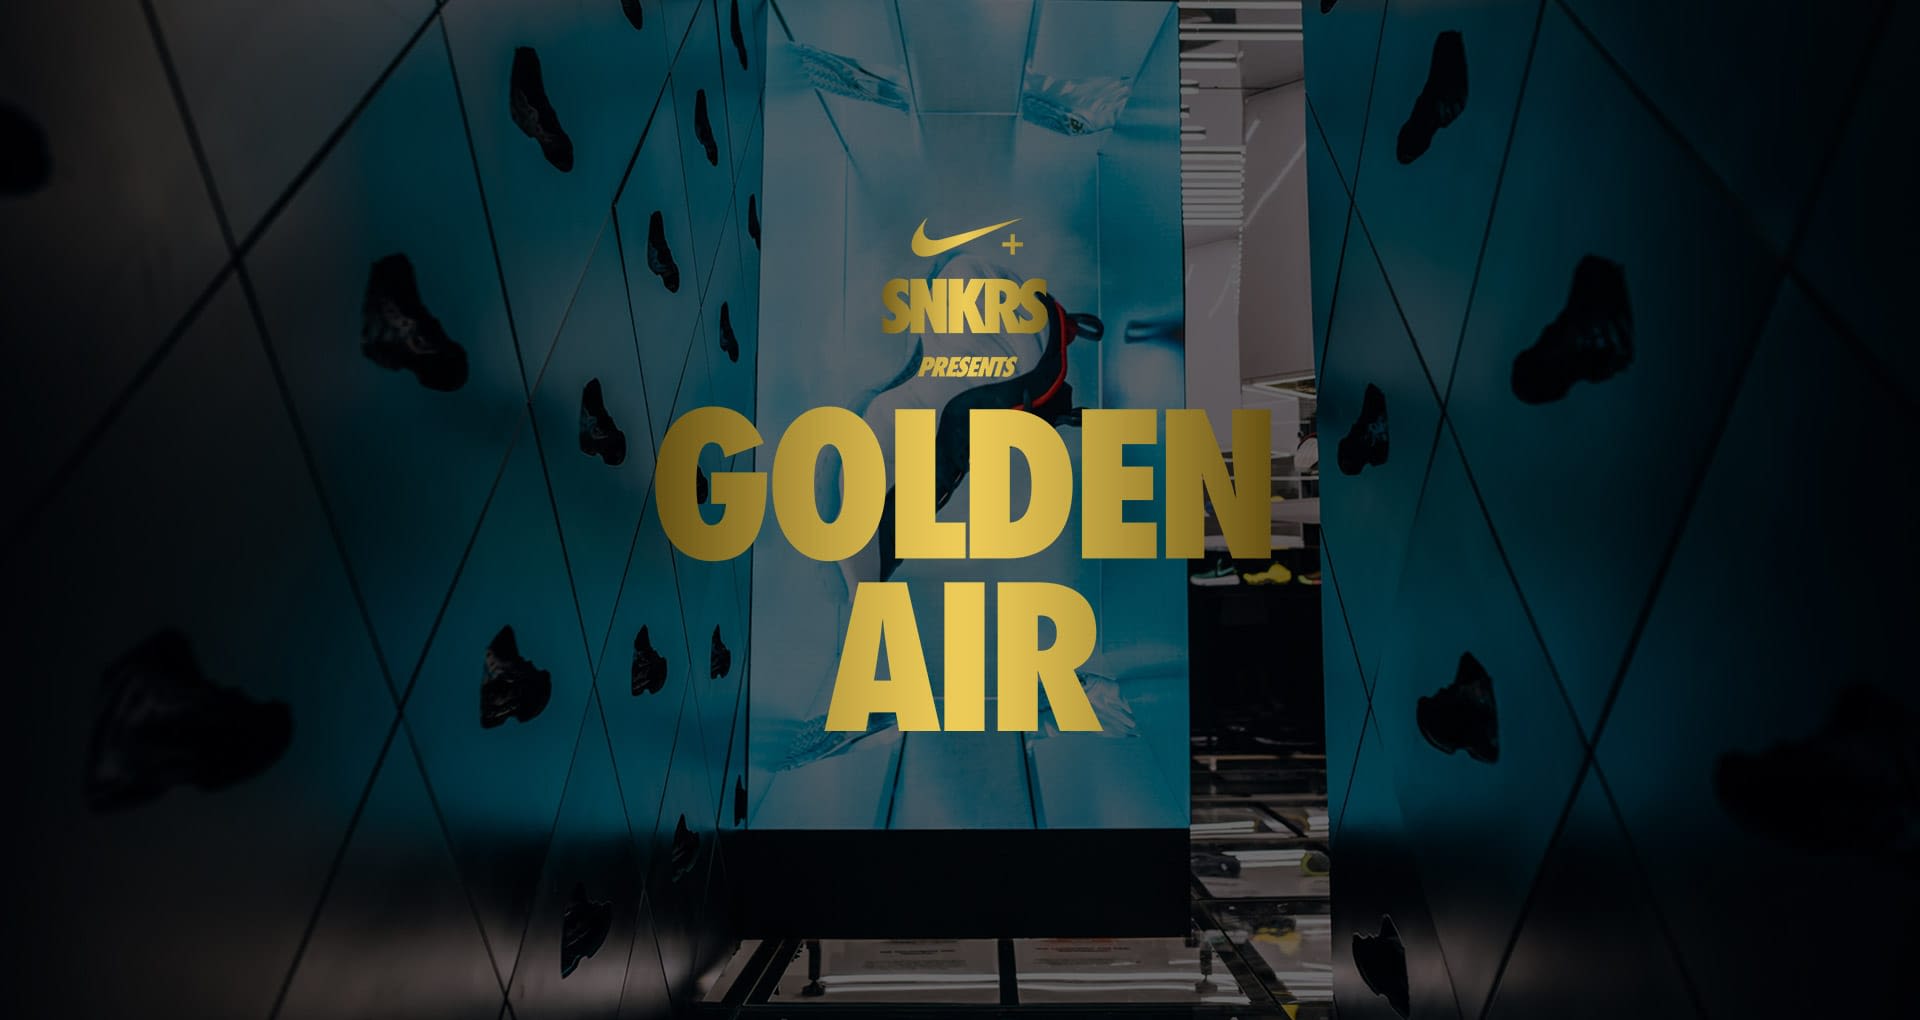 Golden Air: Inside the Experience. Nike SNKRS